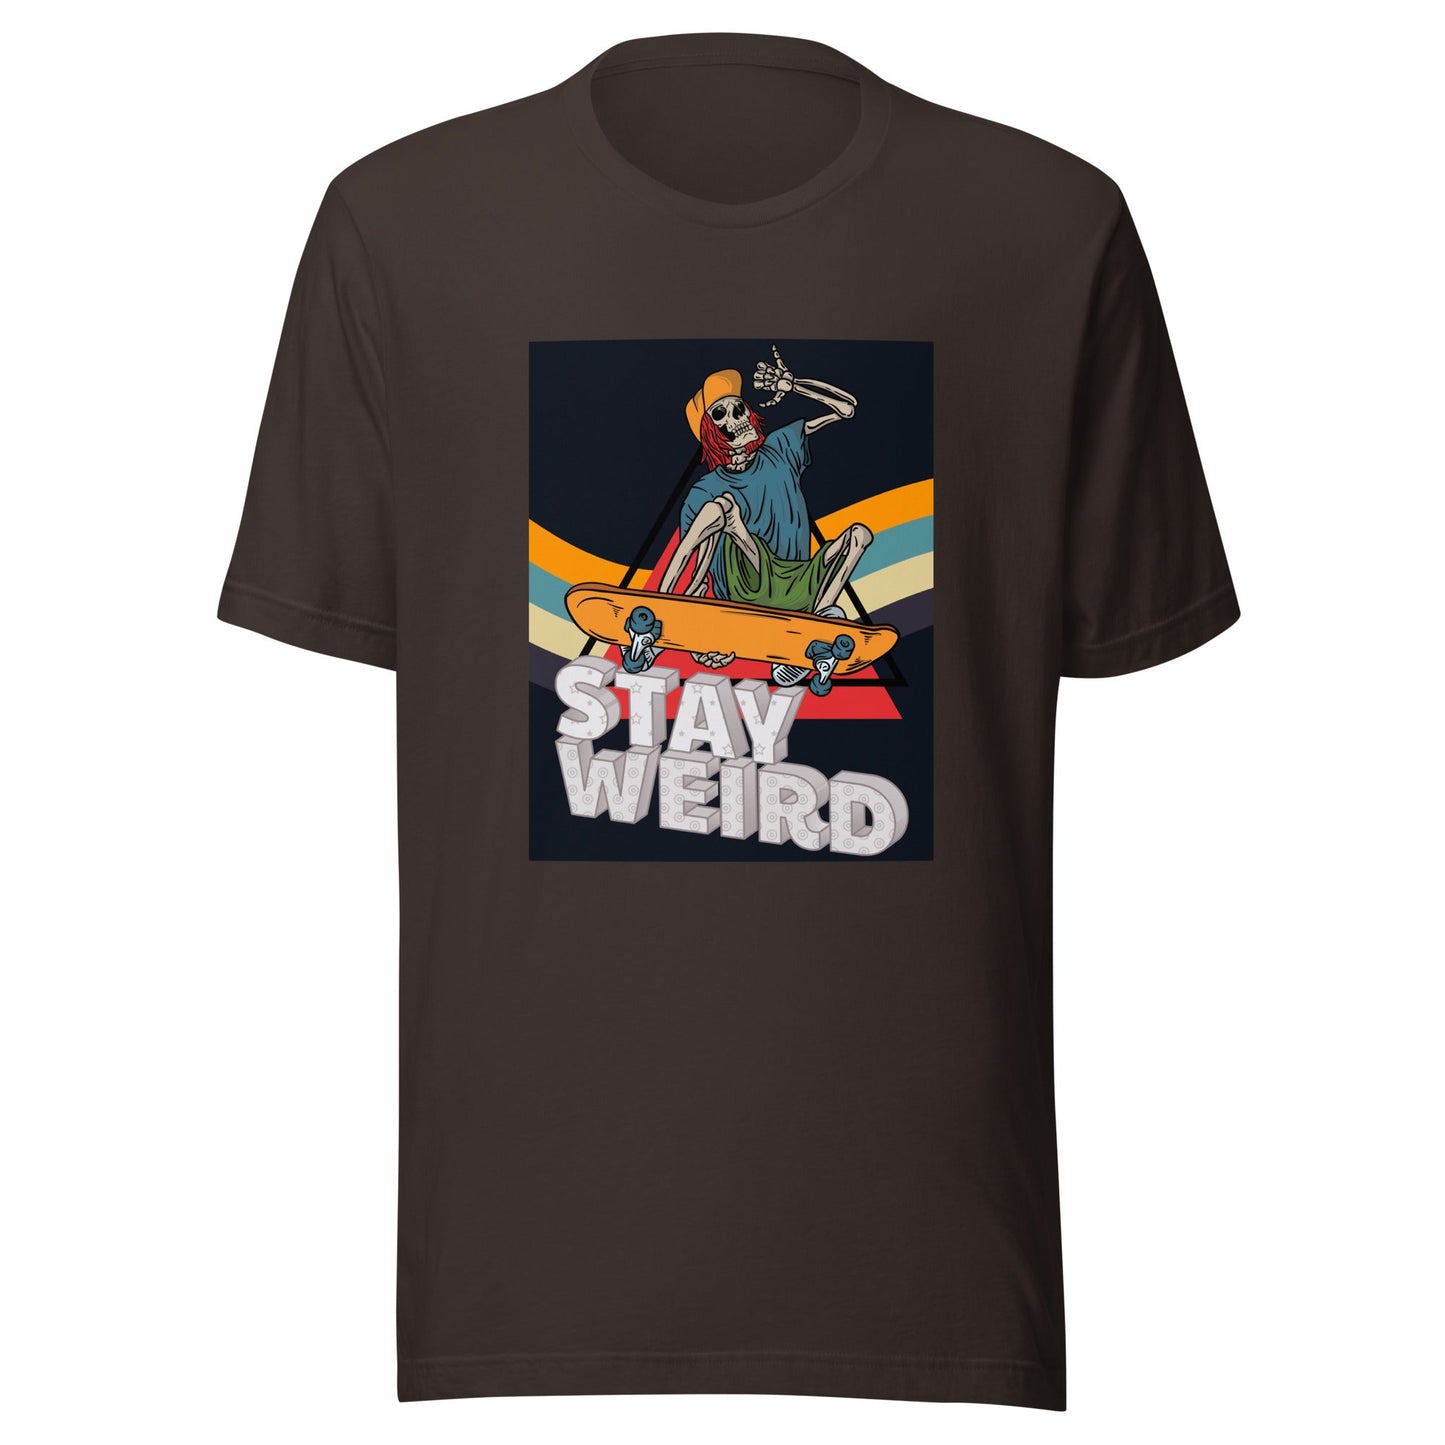 Stay Weird T-Shirt - Embrace Uniqueness with Quirky Style!